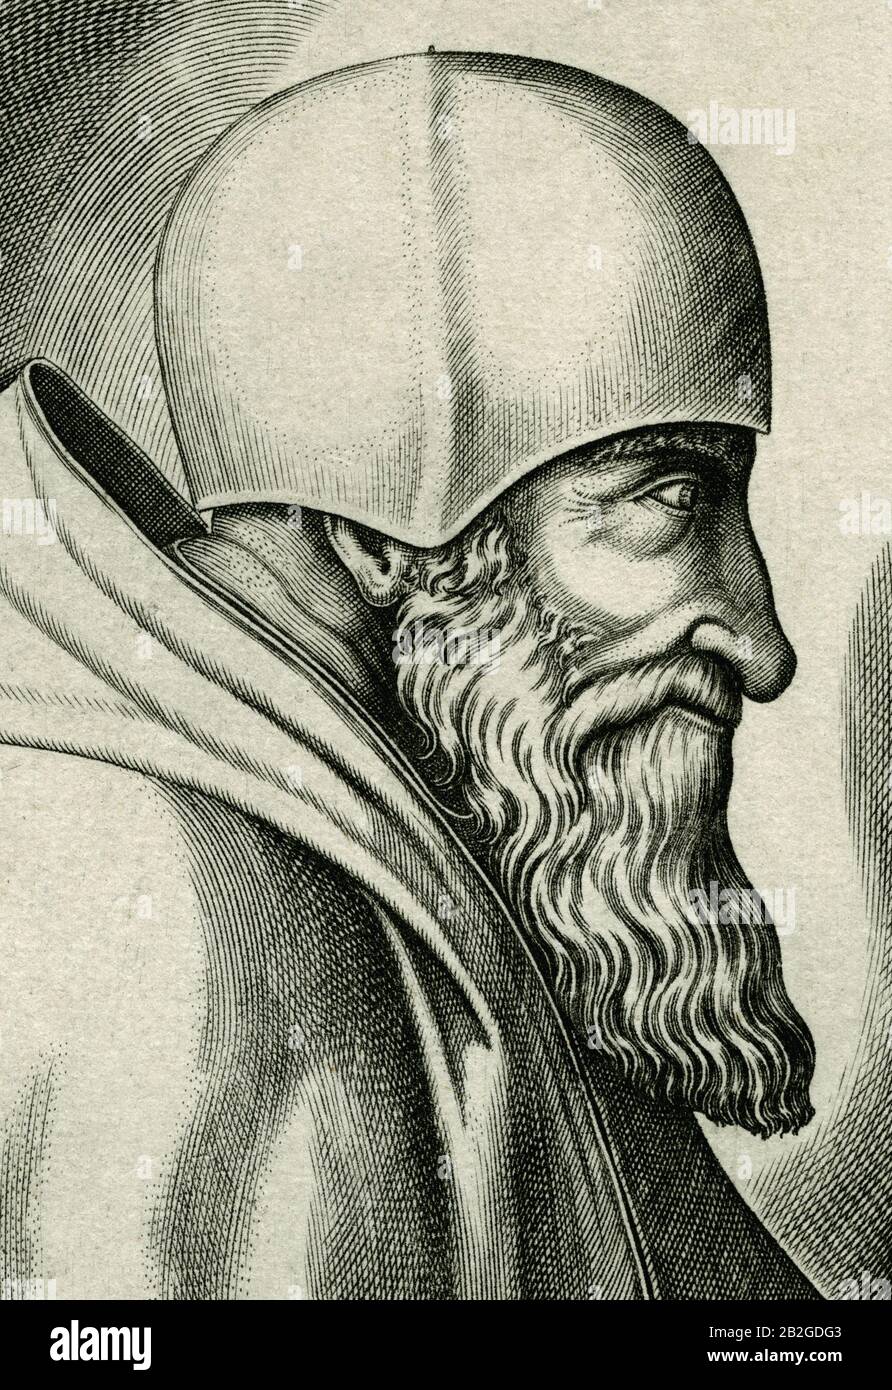 Pope Paul III (1468-1549) who led the Counter-Reformation and was a  significant patron of the arts. Detail of copperplate engraving created in  the 1600s by engraver and printmaker Friedrich von Hulsen (c.1580-1665).